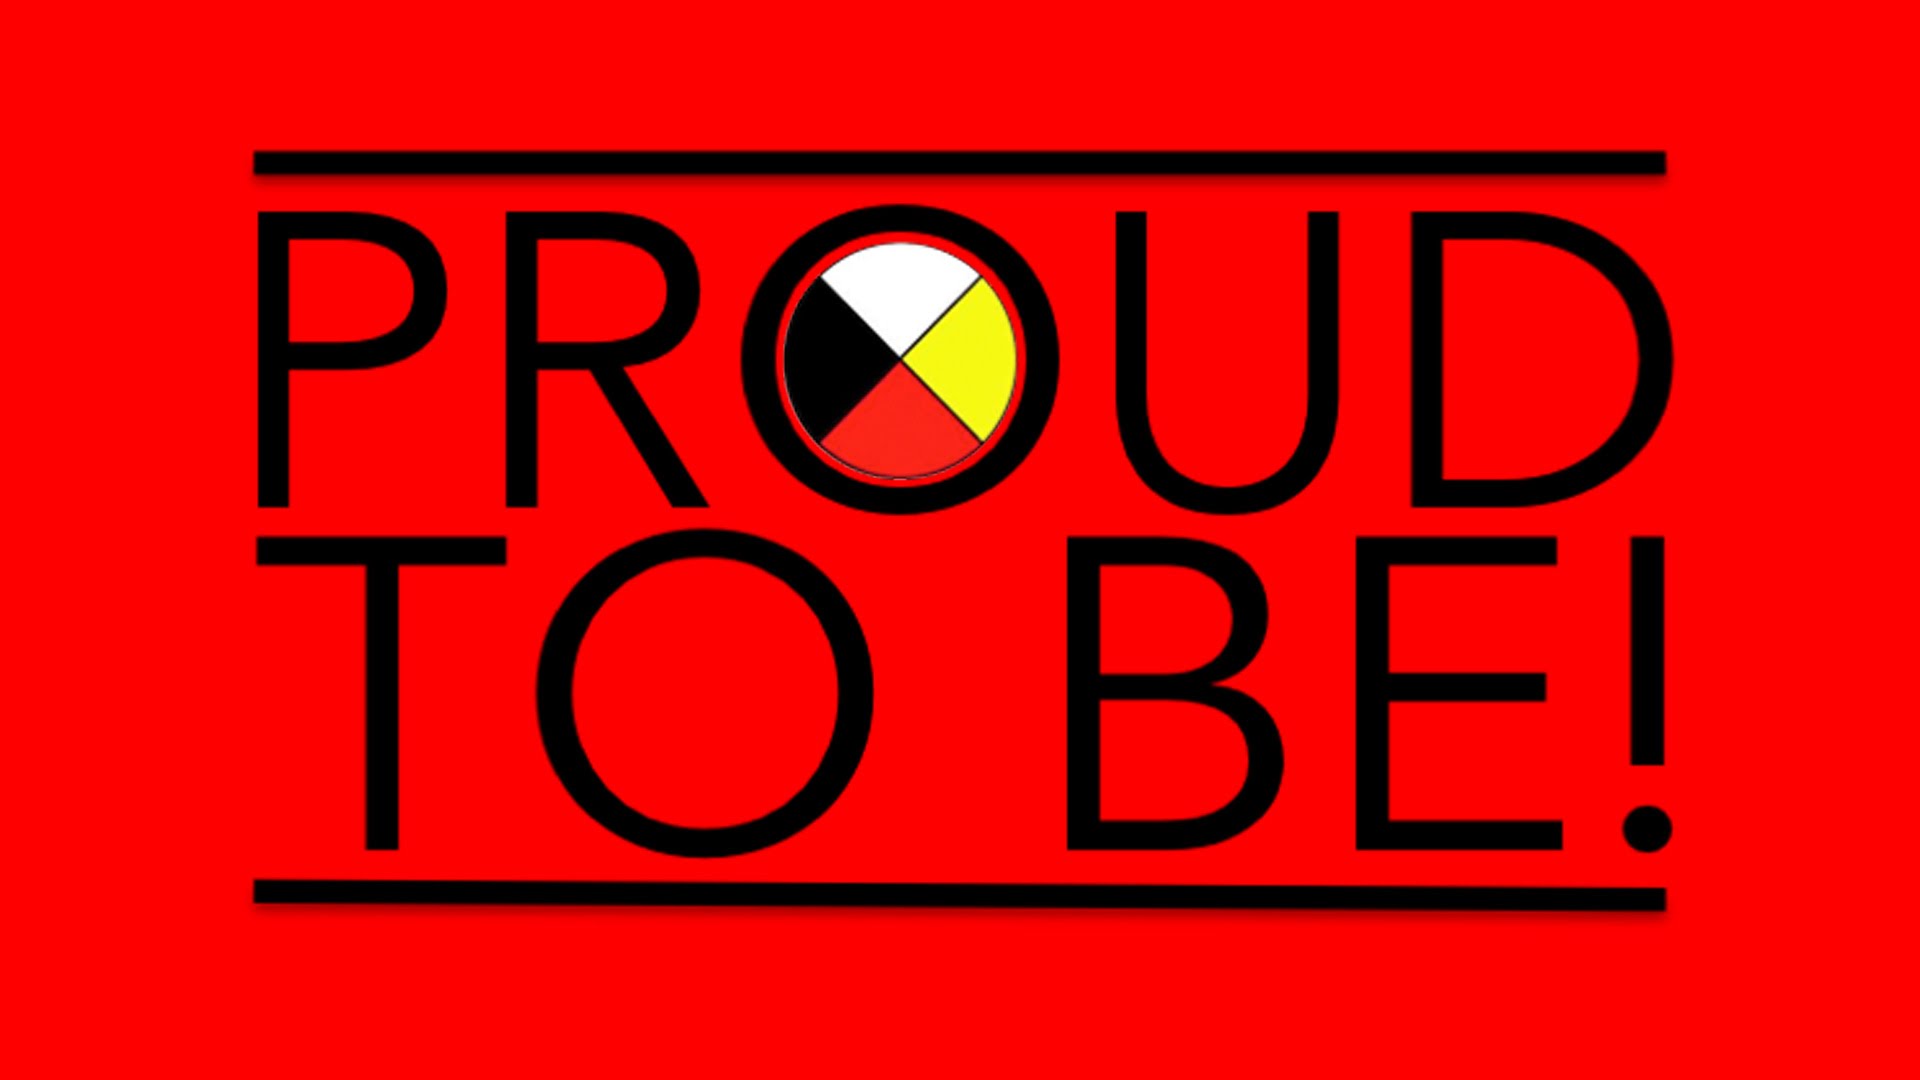 AF Chat: Proud To Be! Apparel - YouTube